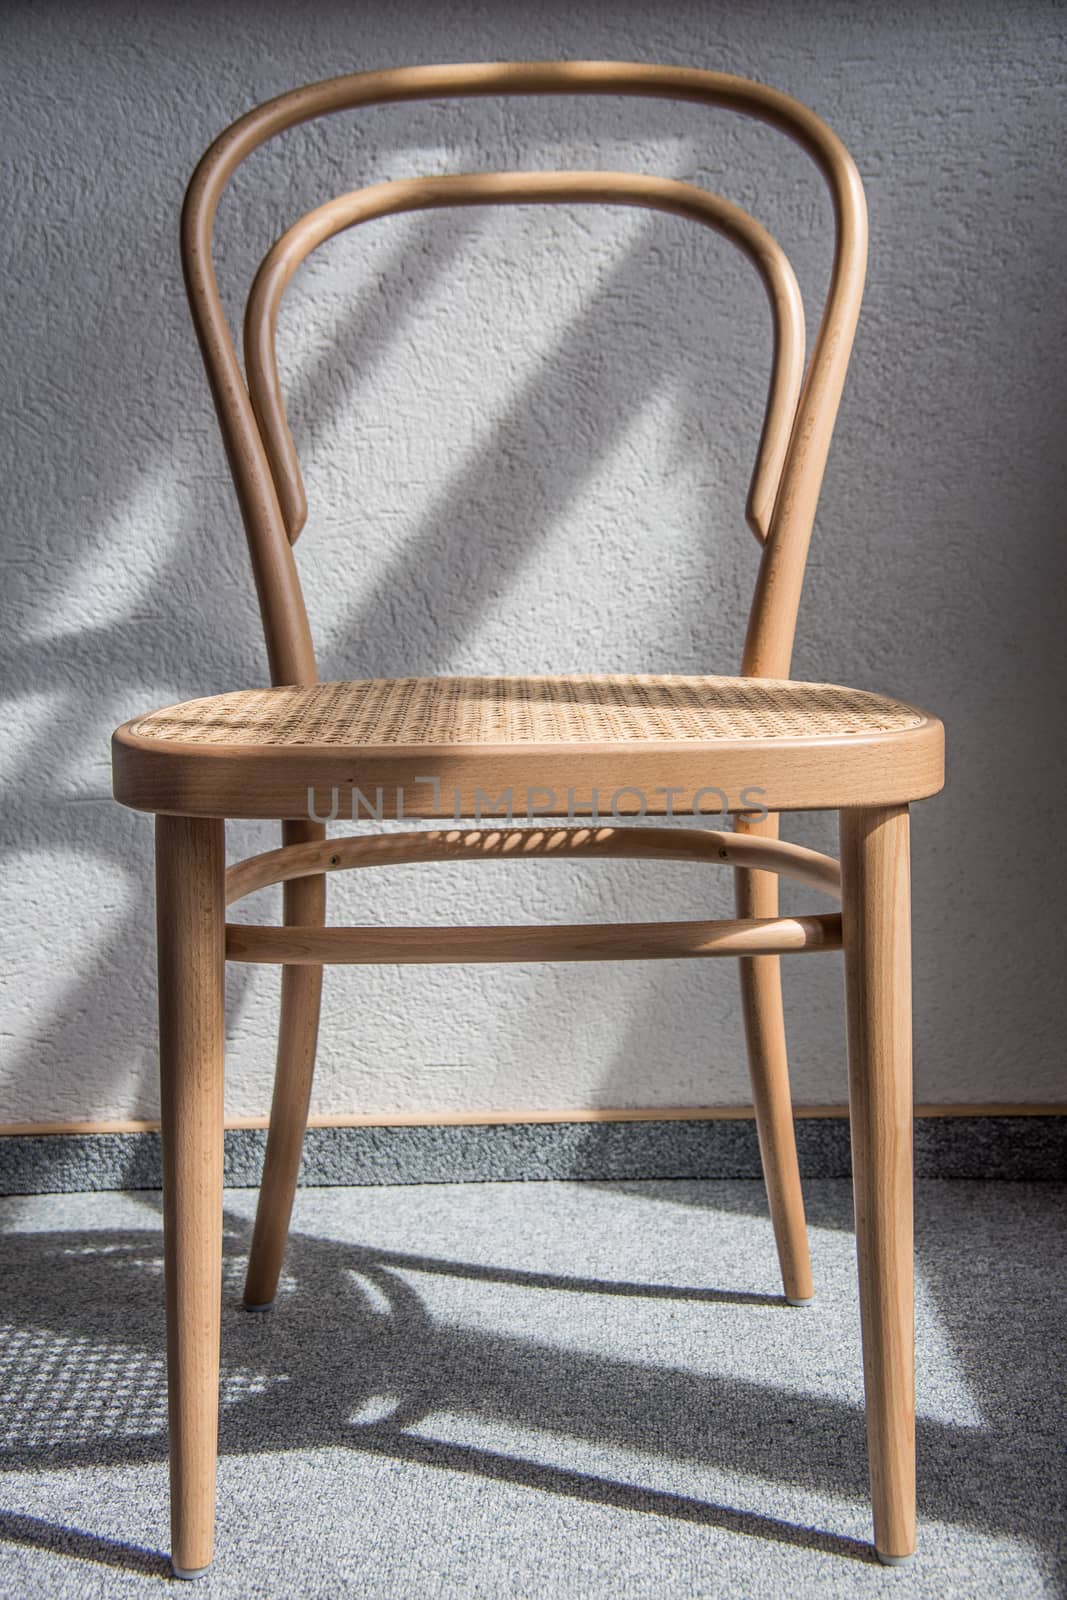 Thonet chair in beech wood and wattle